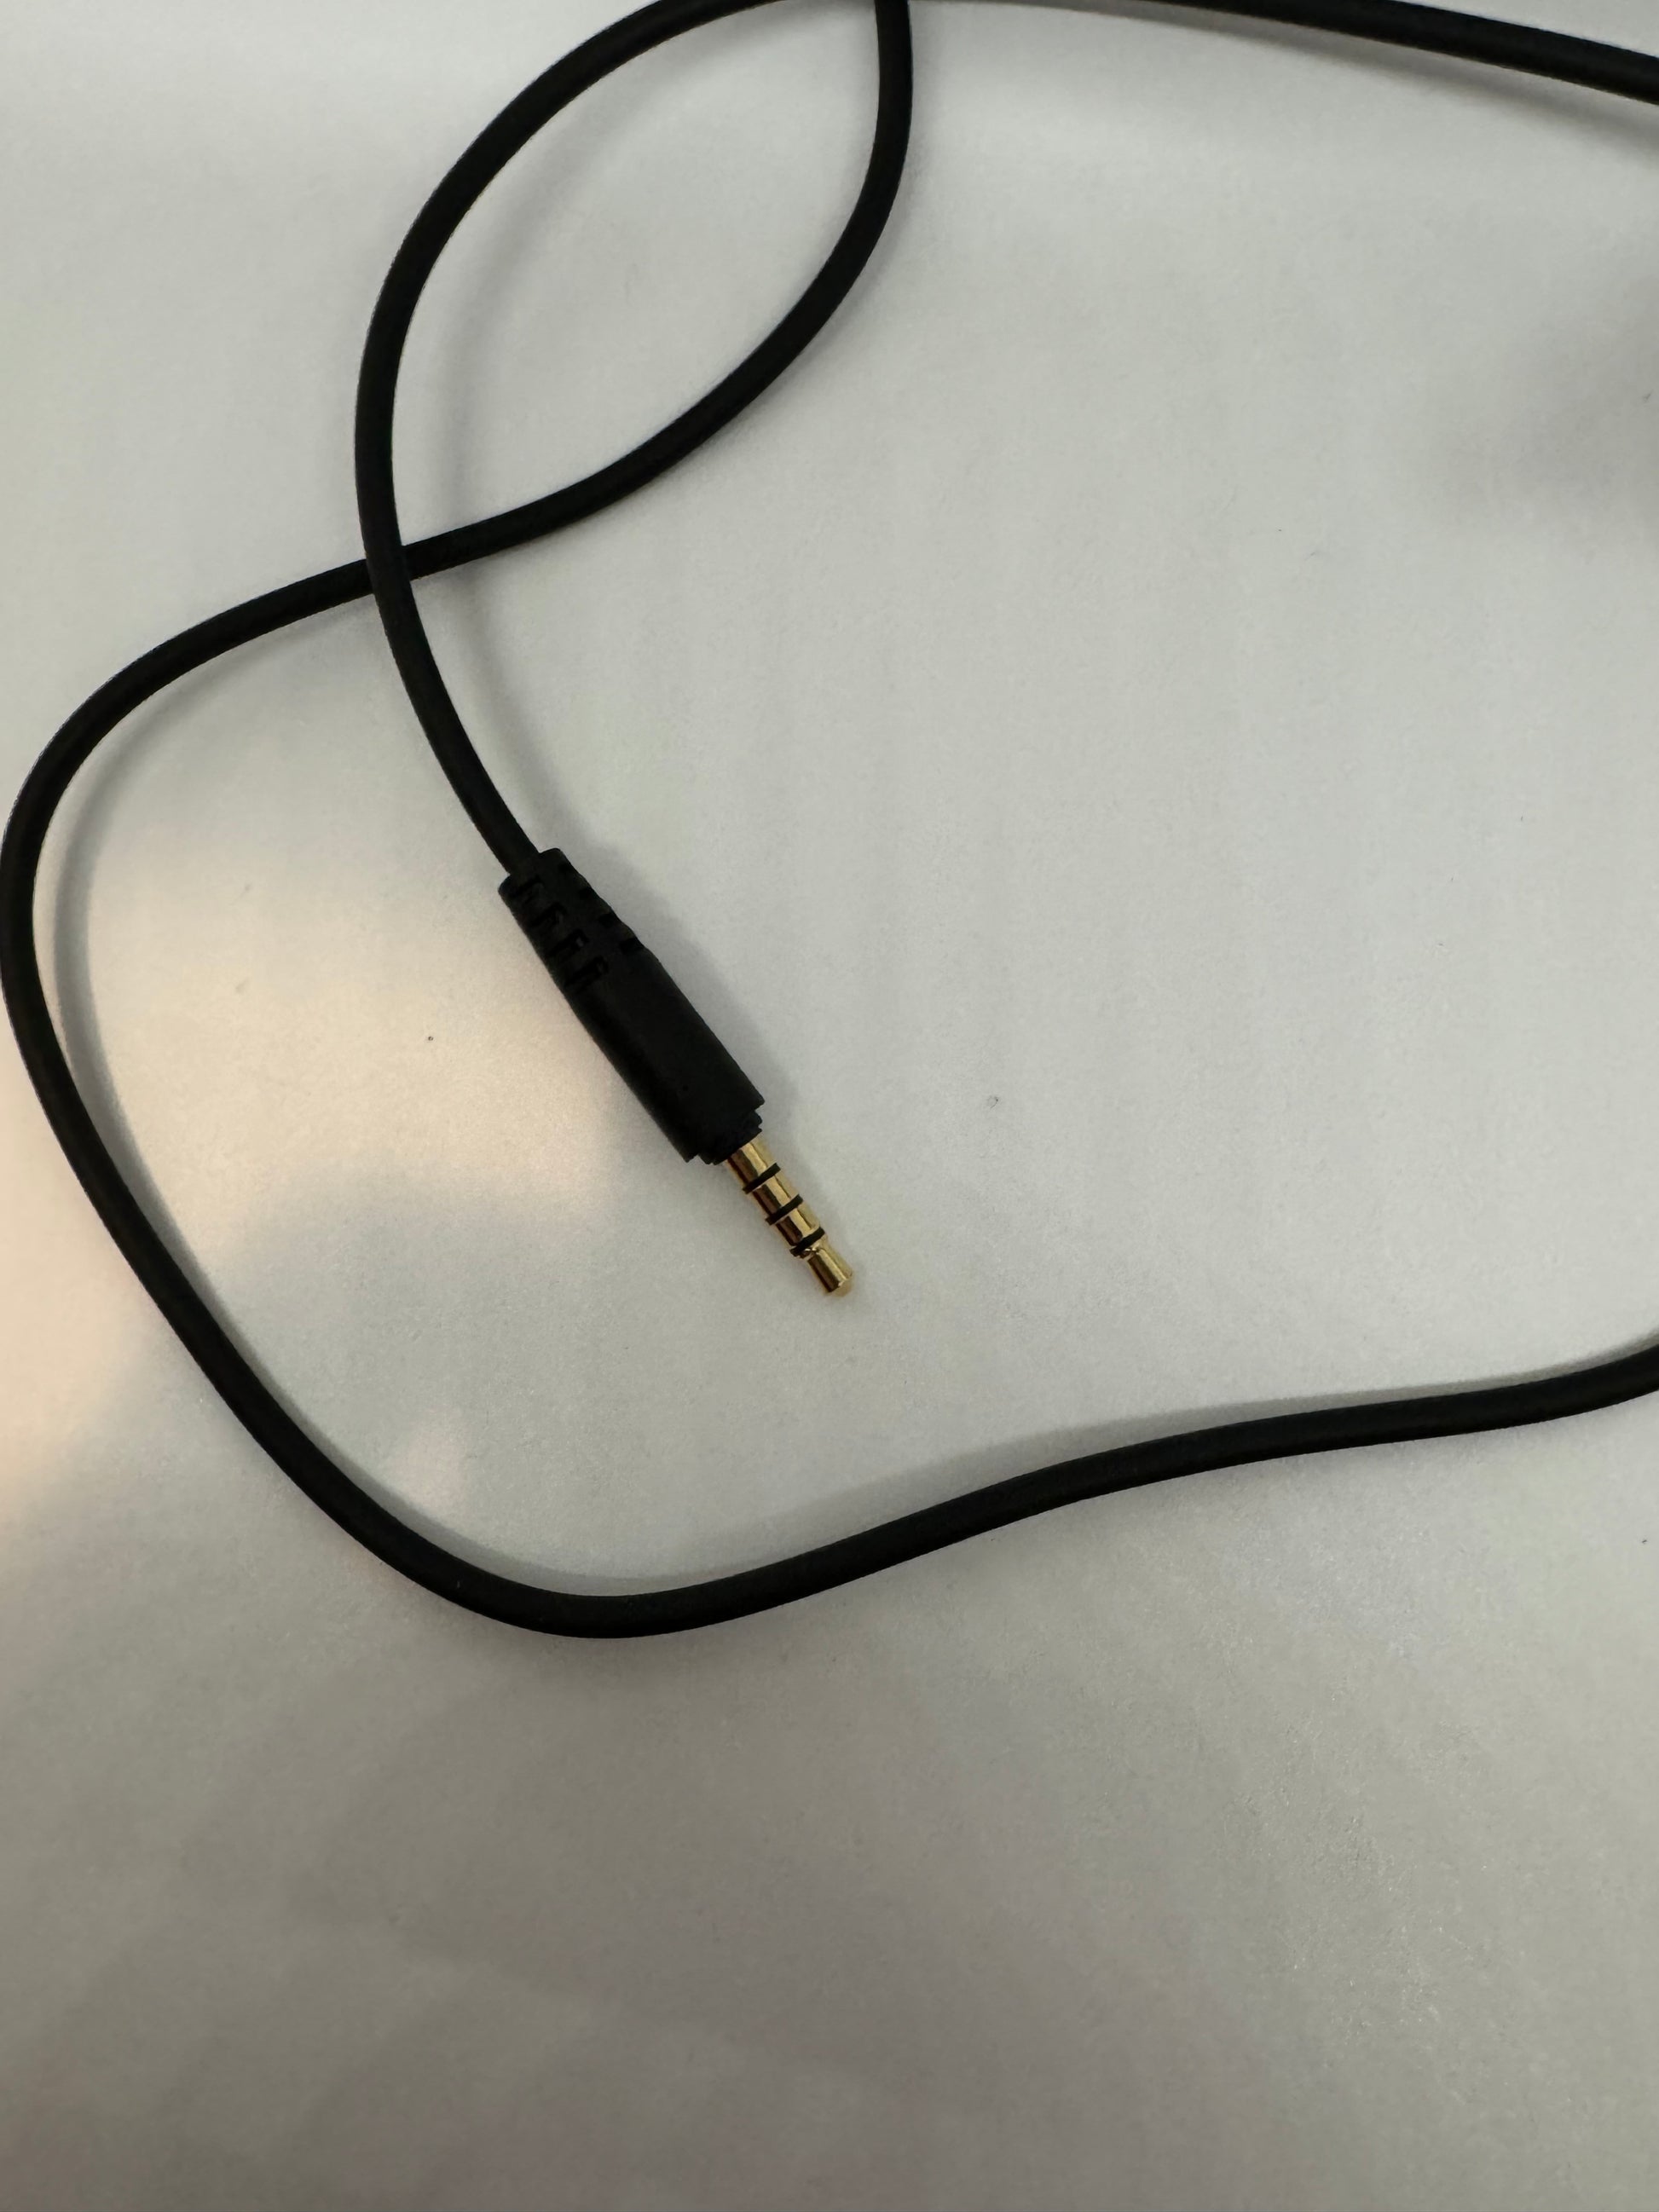 The picture shows a black audio cable on a white surface. The cable has a 3.5mm audio jack at one end. The jack has three bands on it, which usually indicates that it's a TRRS connector, often used for headphones that have a microphone built in. The cable appears to be in good condition.